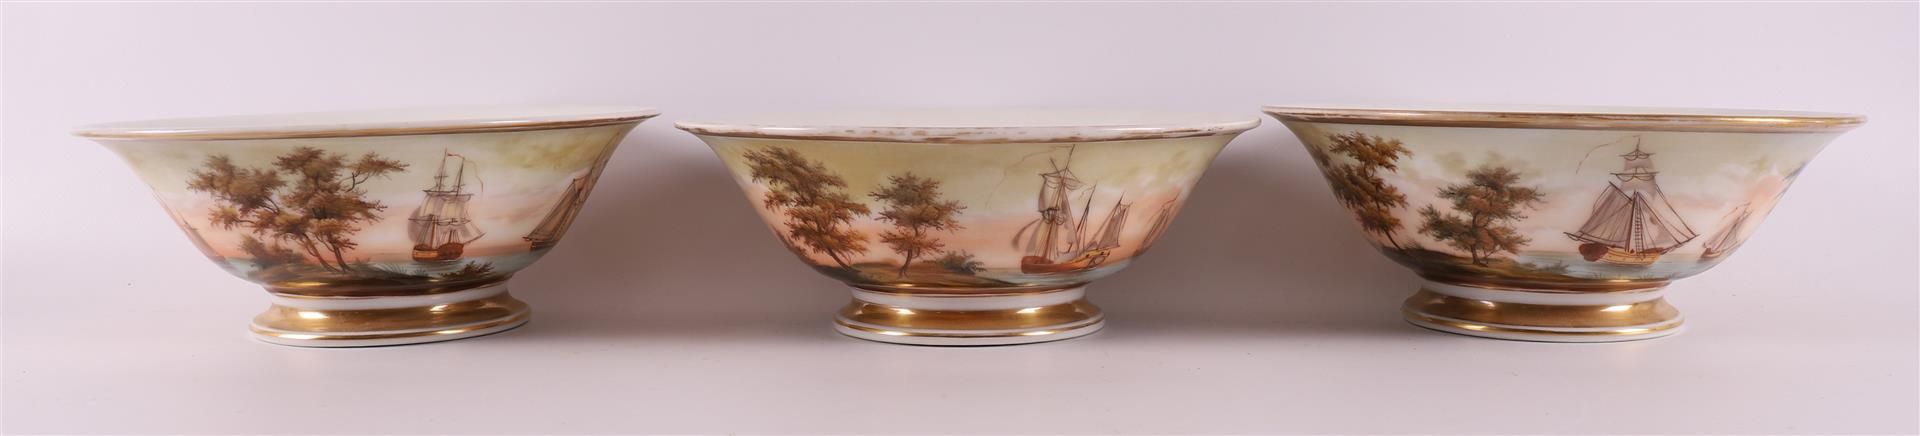 A series of three porcelain bowls, 19th century. - Image 3 of 7